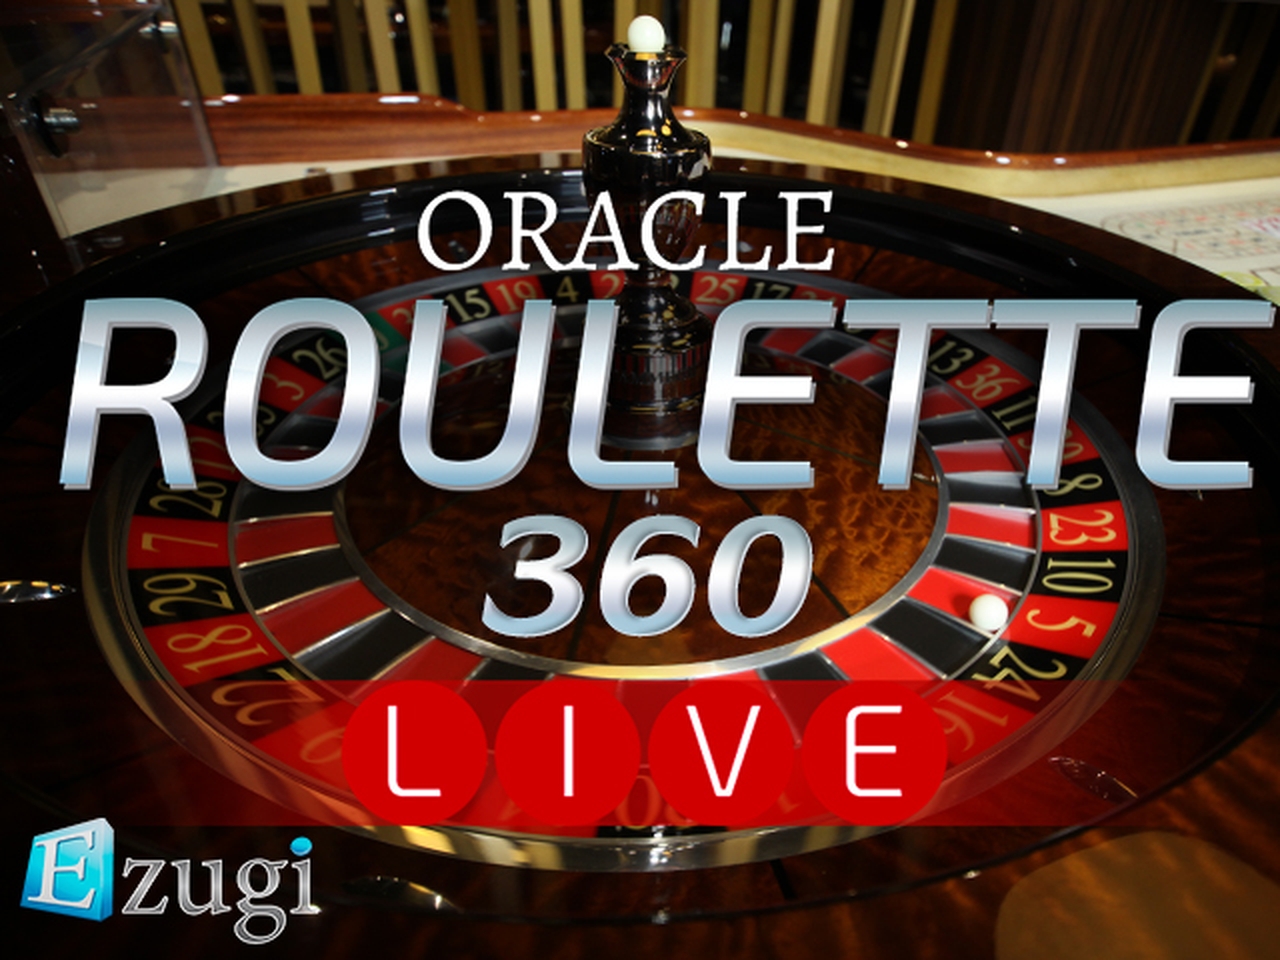 The Roulette Oracle Casino 360 Online Slot Demo Game by Ezugi